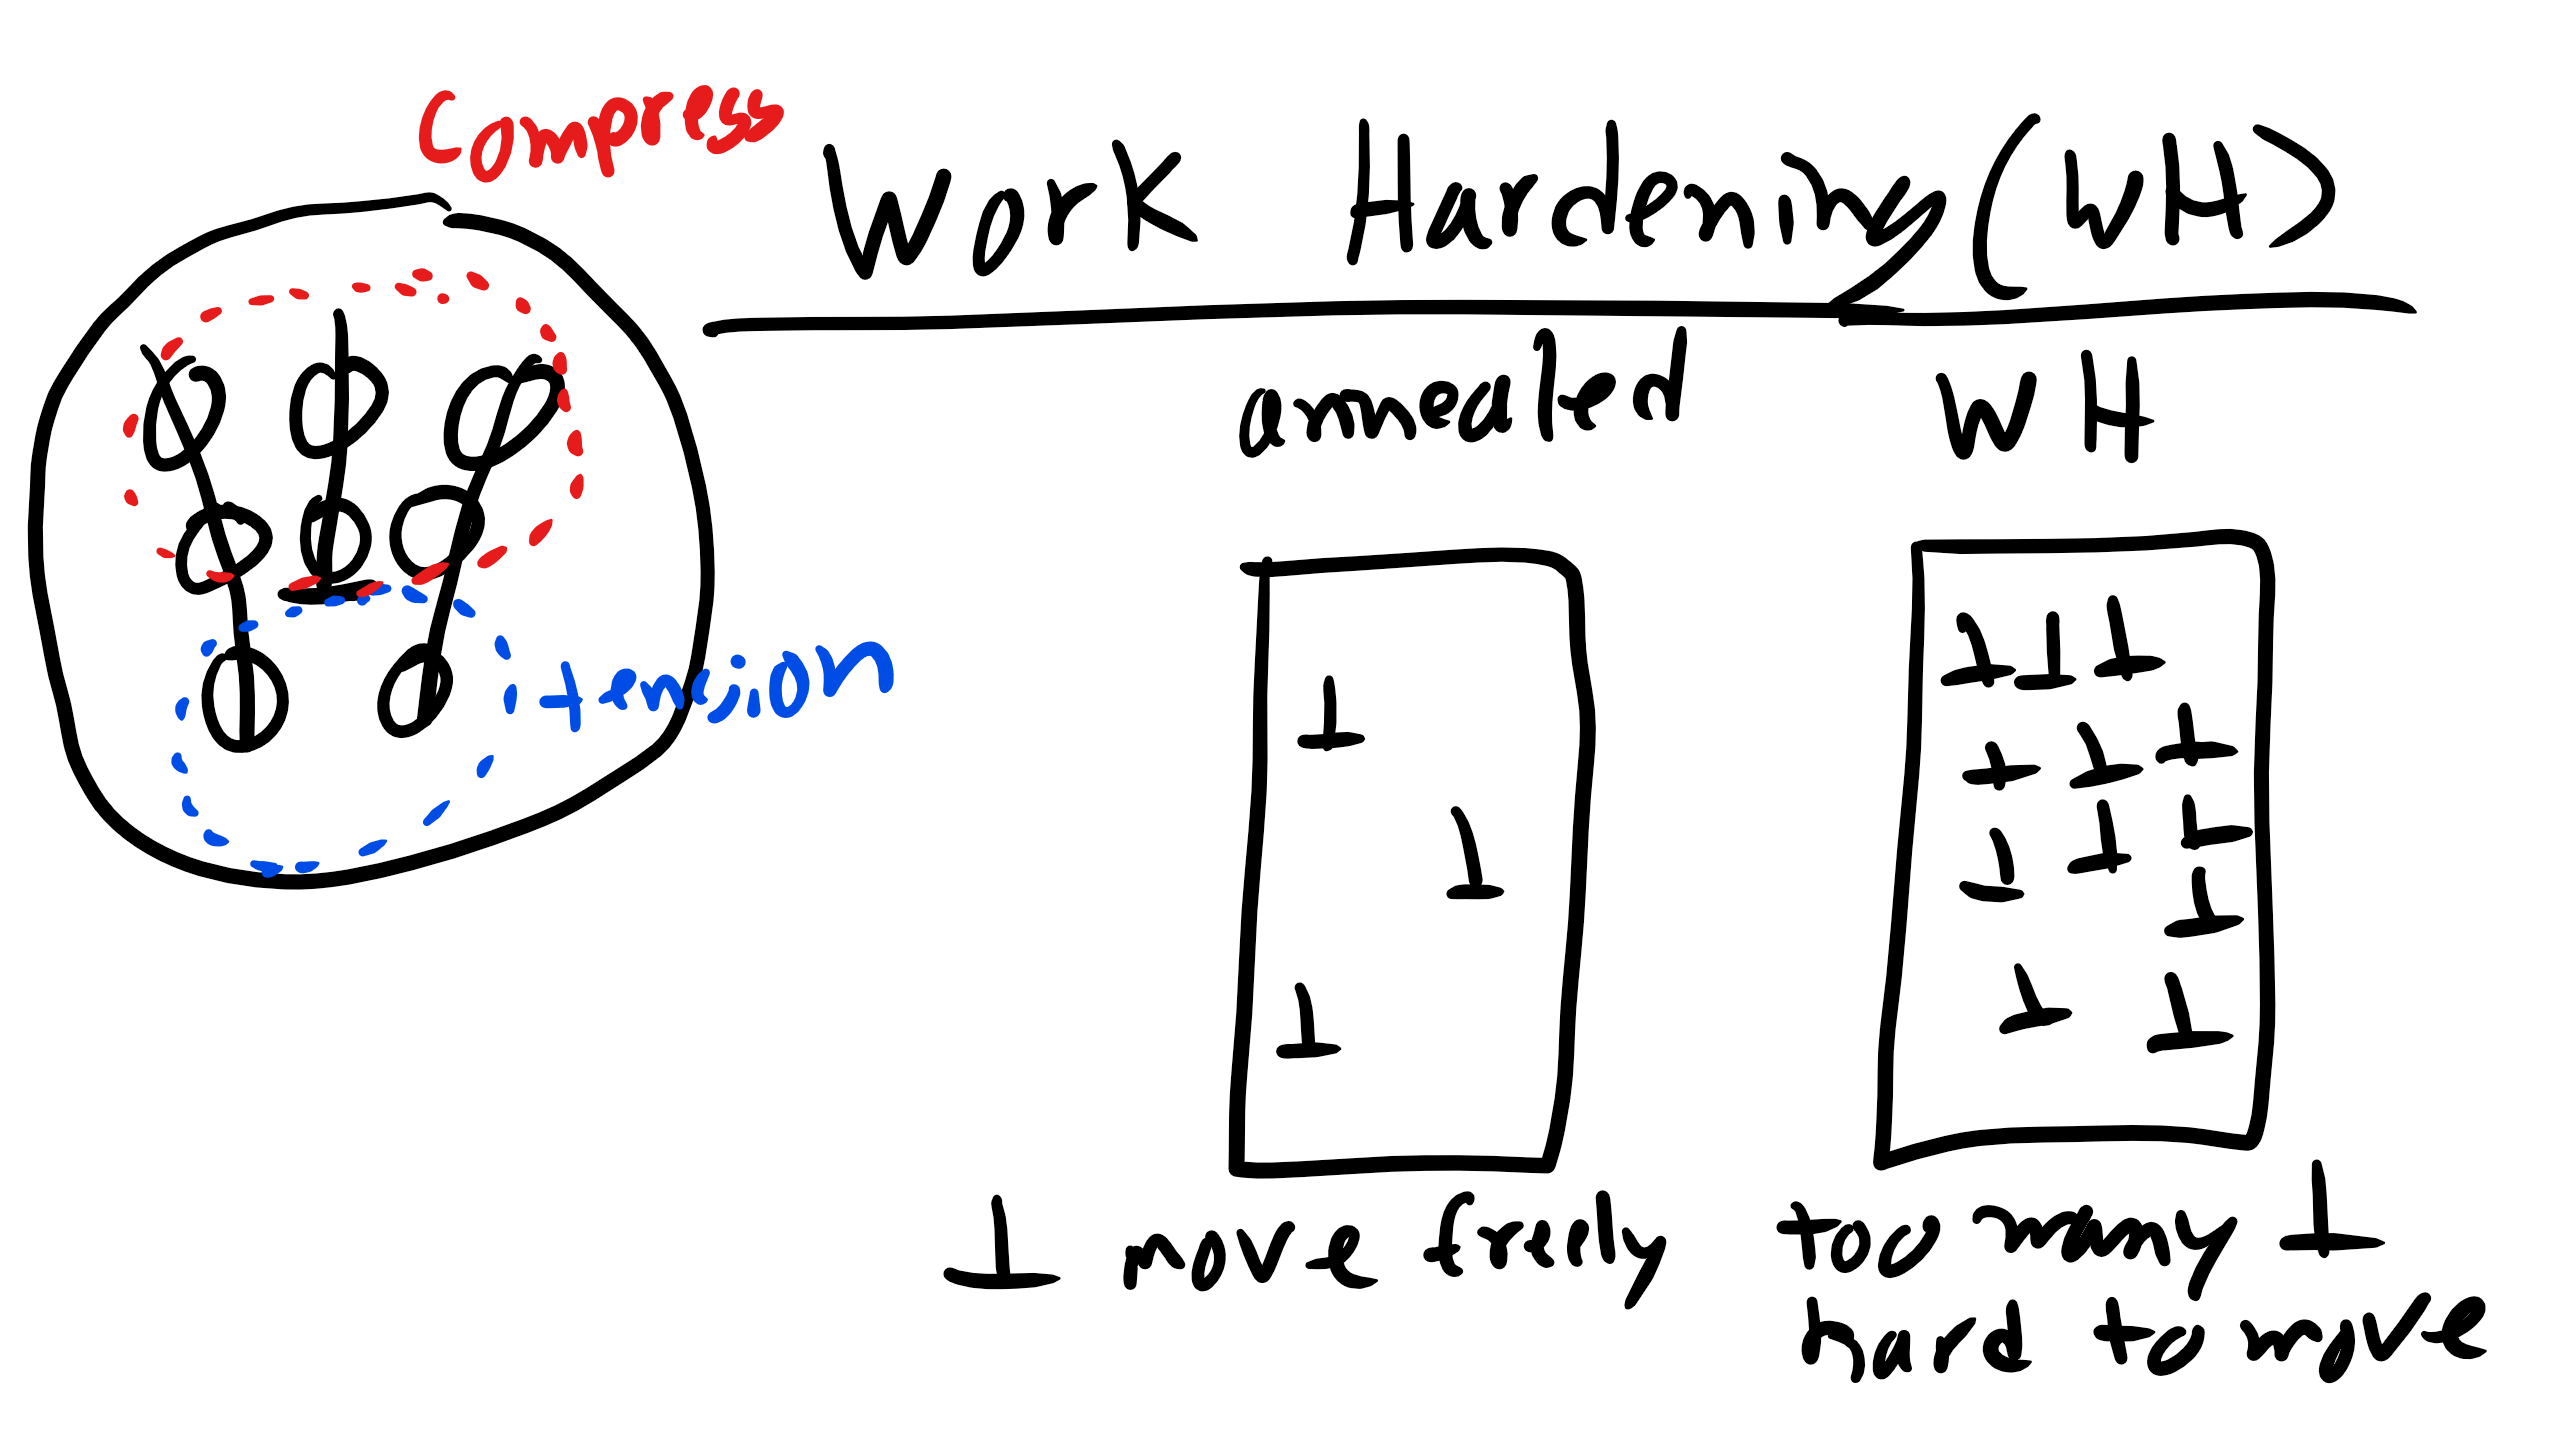 workhardening.png